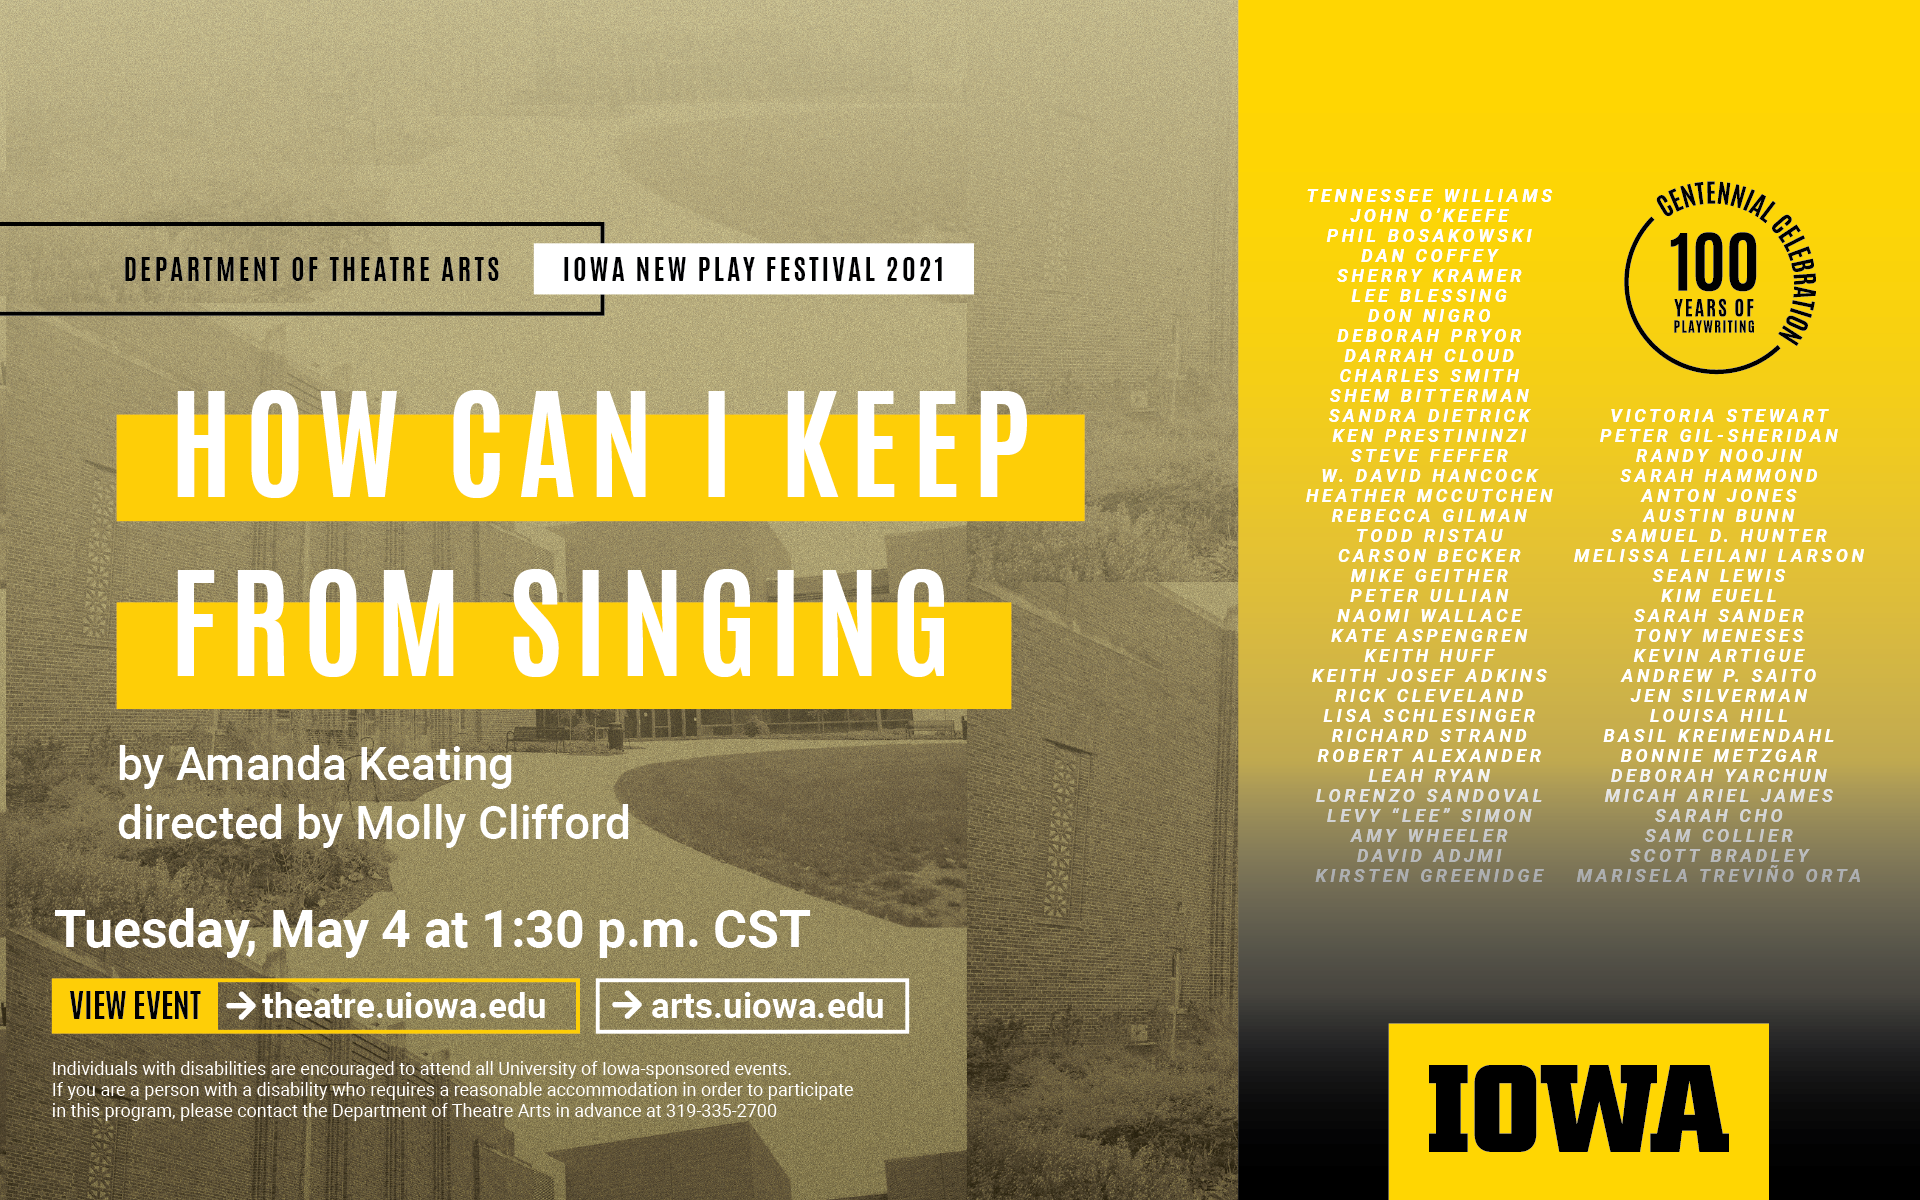 HOW CAN I KEEP FROM SINGING. By Amanda Keating. Directed by Molly Clifford. Tuesday, May 4 at 1:30 p.m. theatre.uiowa.edu.